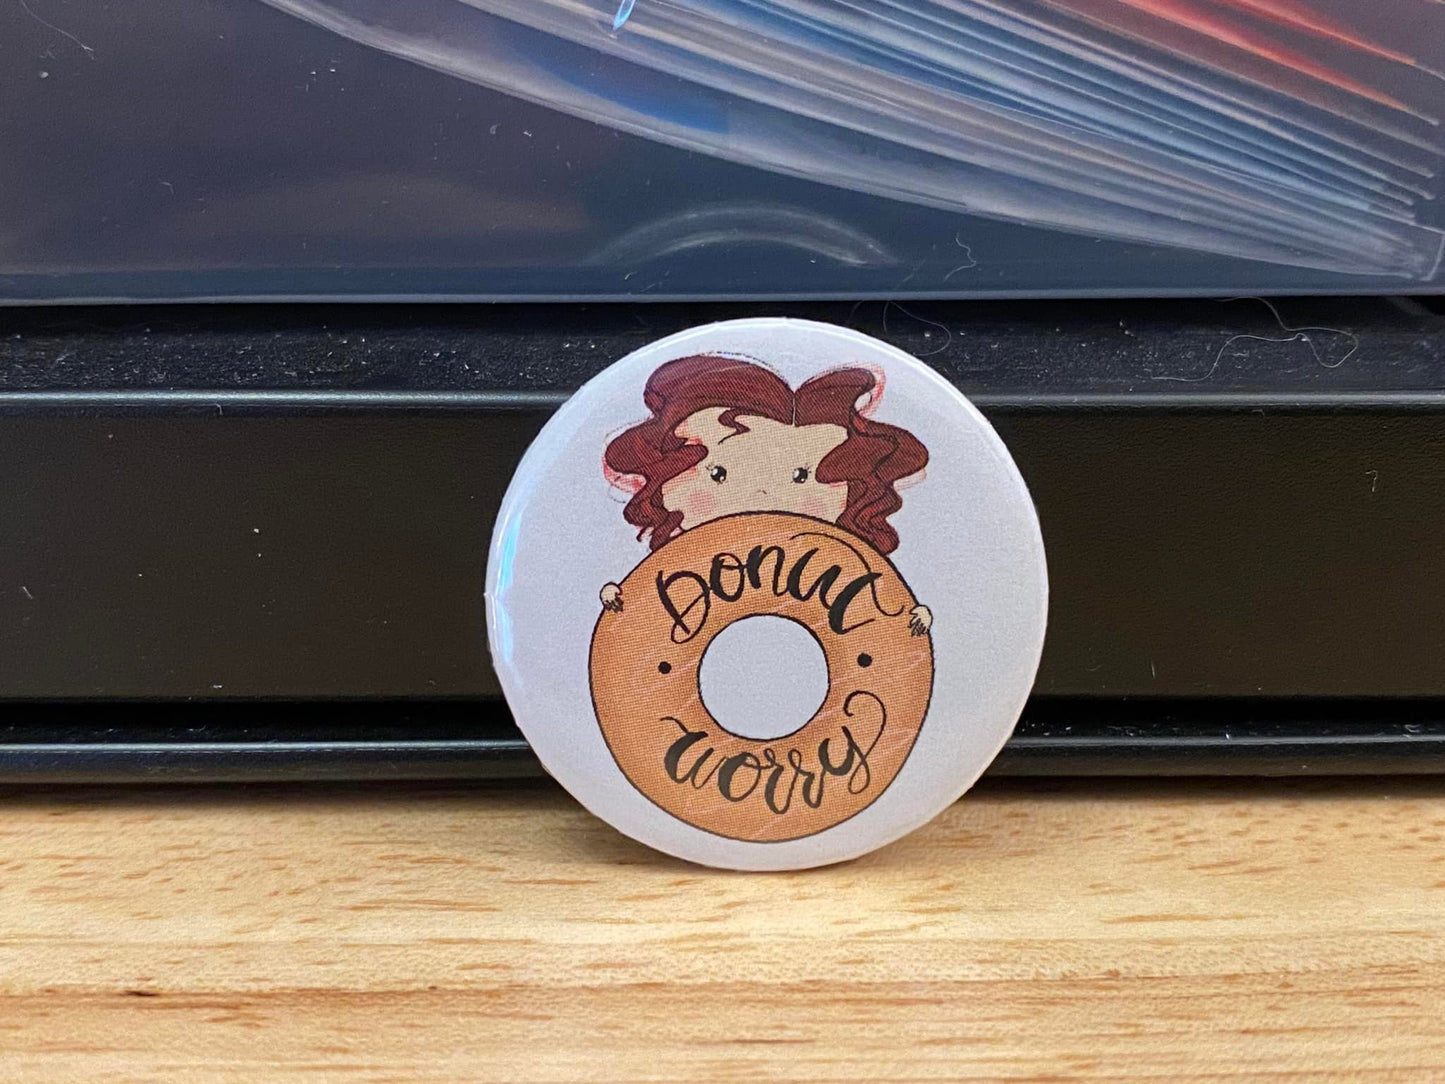 Donut Worry 1.25" / 2.25" Button Pin